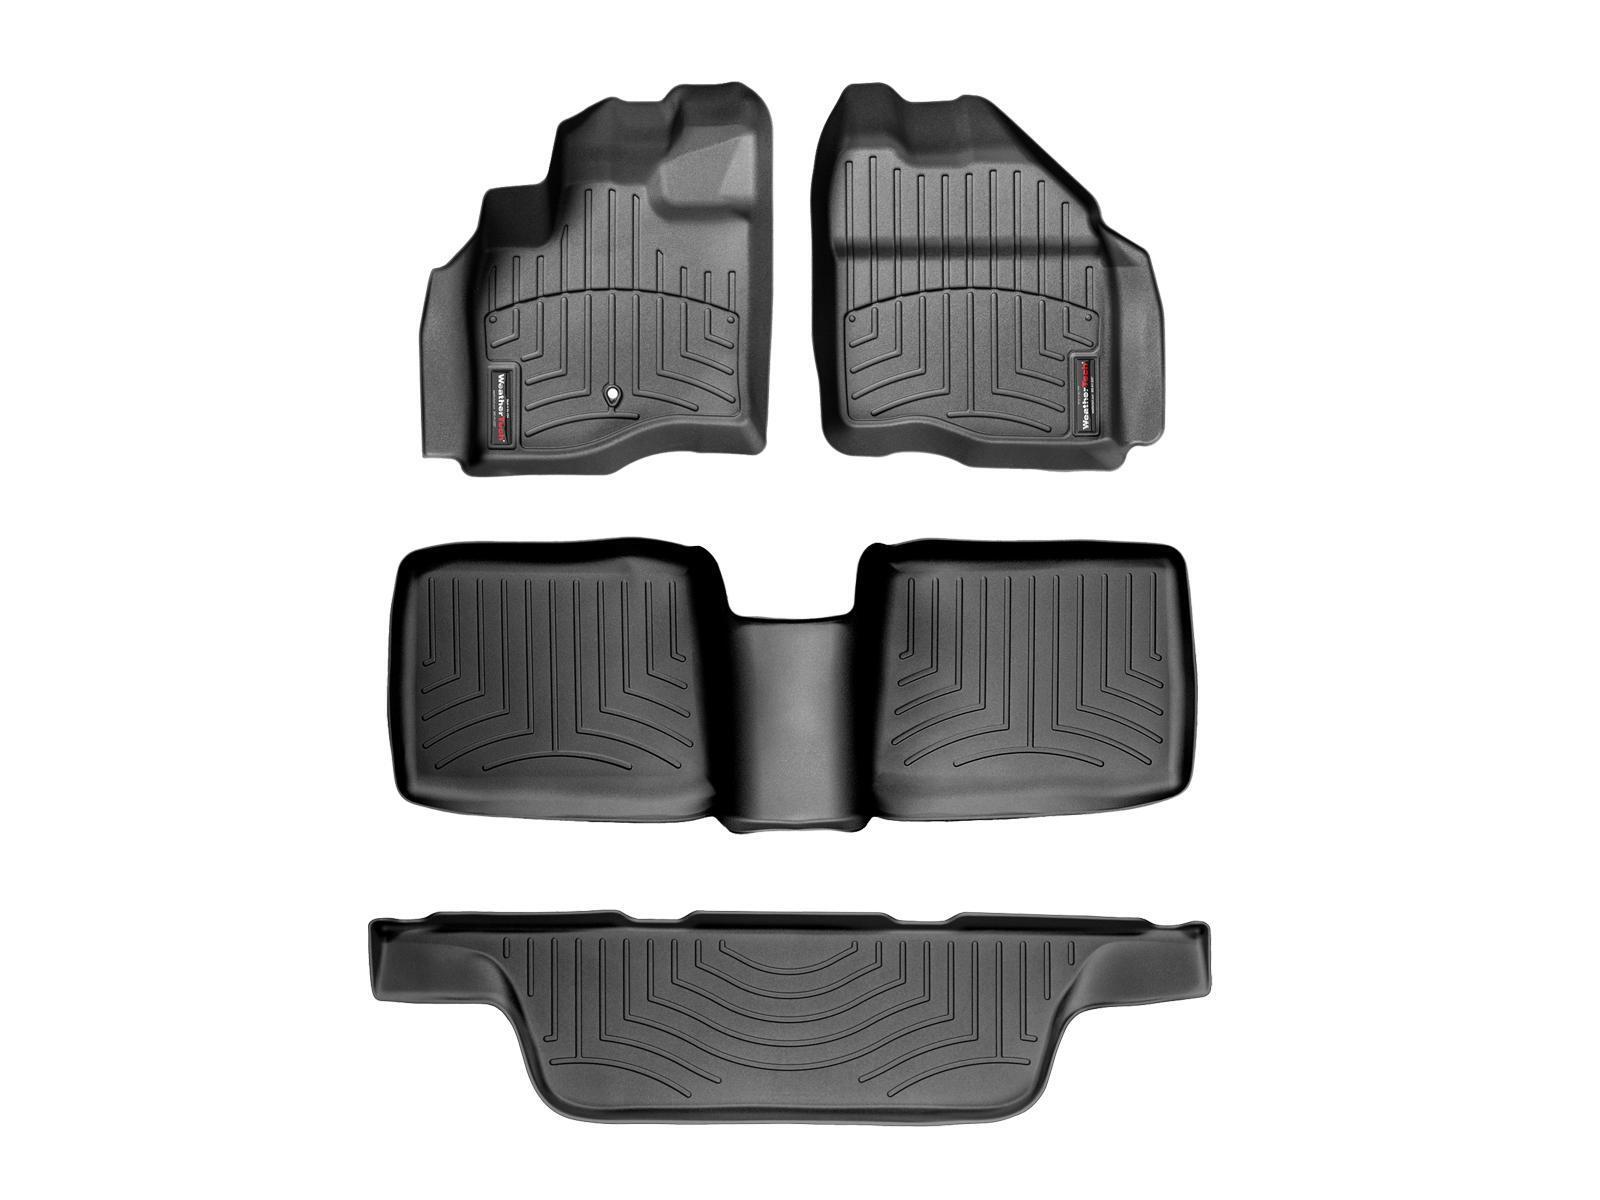 WeatherTech FloorLiner for Ford Taurus X '08-'09/ Ford Freestyle '05-'07 - Black